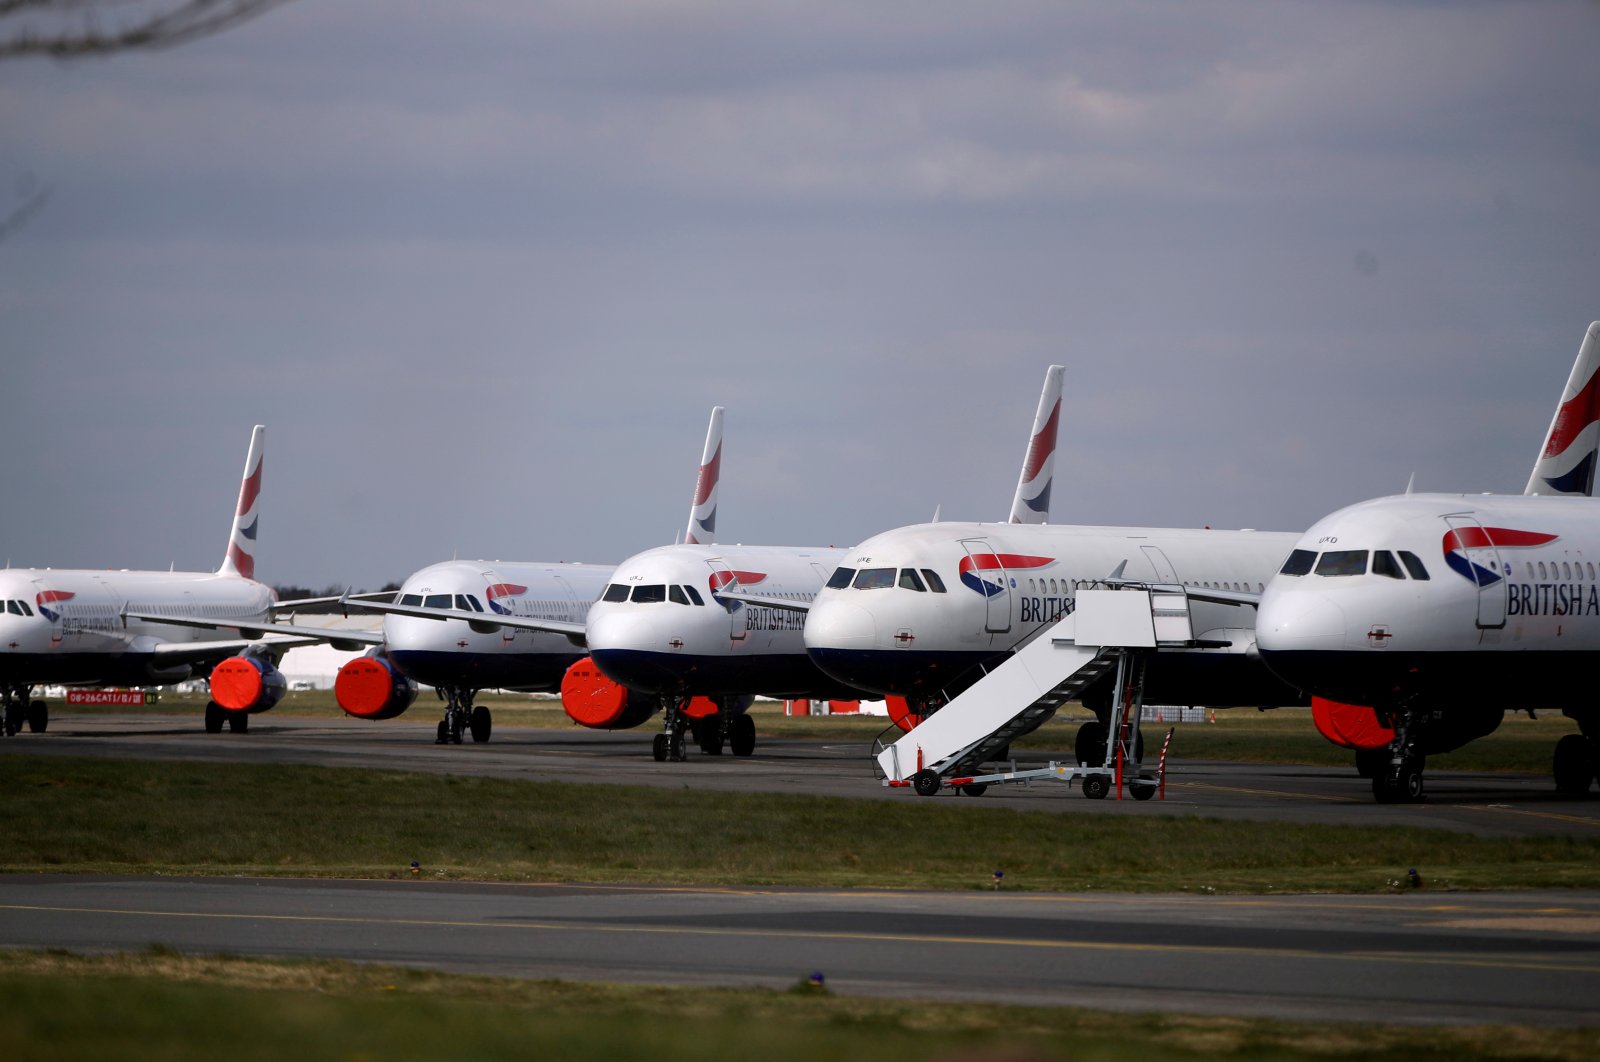 British Airways planes are seen parked at Bournemouth Airport, as the spread of the coronavirus disease continues, Bournemouth, Britain, April 1, 2020. (Reuters Photo)